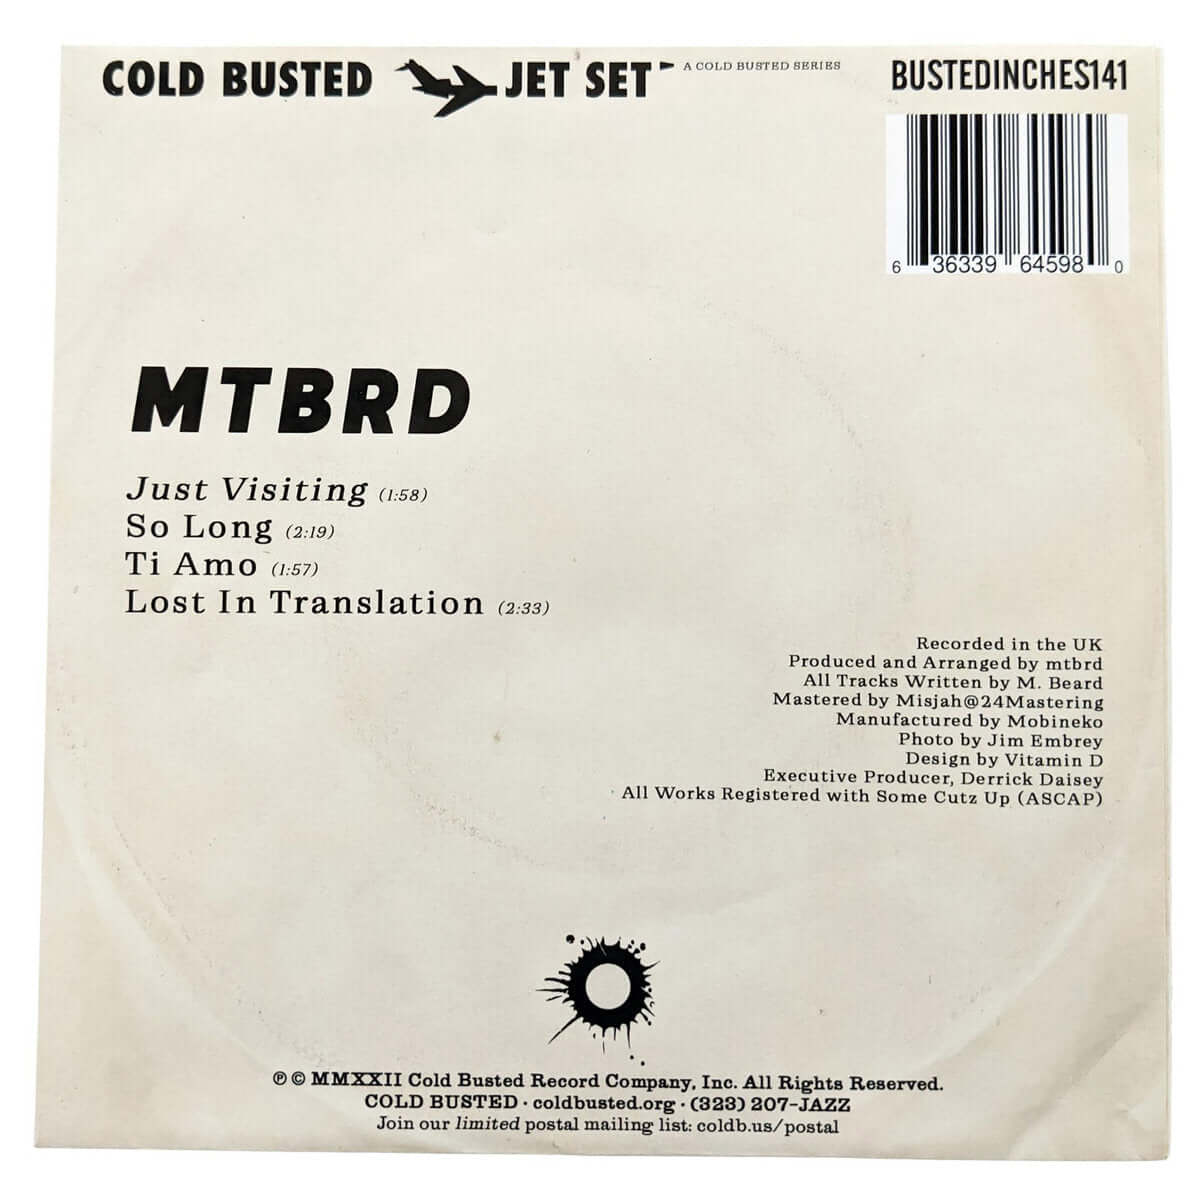 mtbrd - Just Visiting - Limited Edition 7 Inch Vinyl - Cold Busted